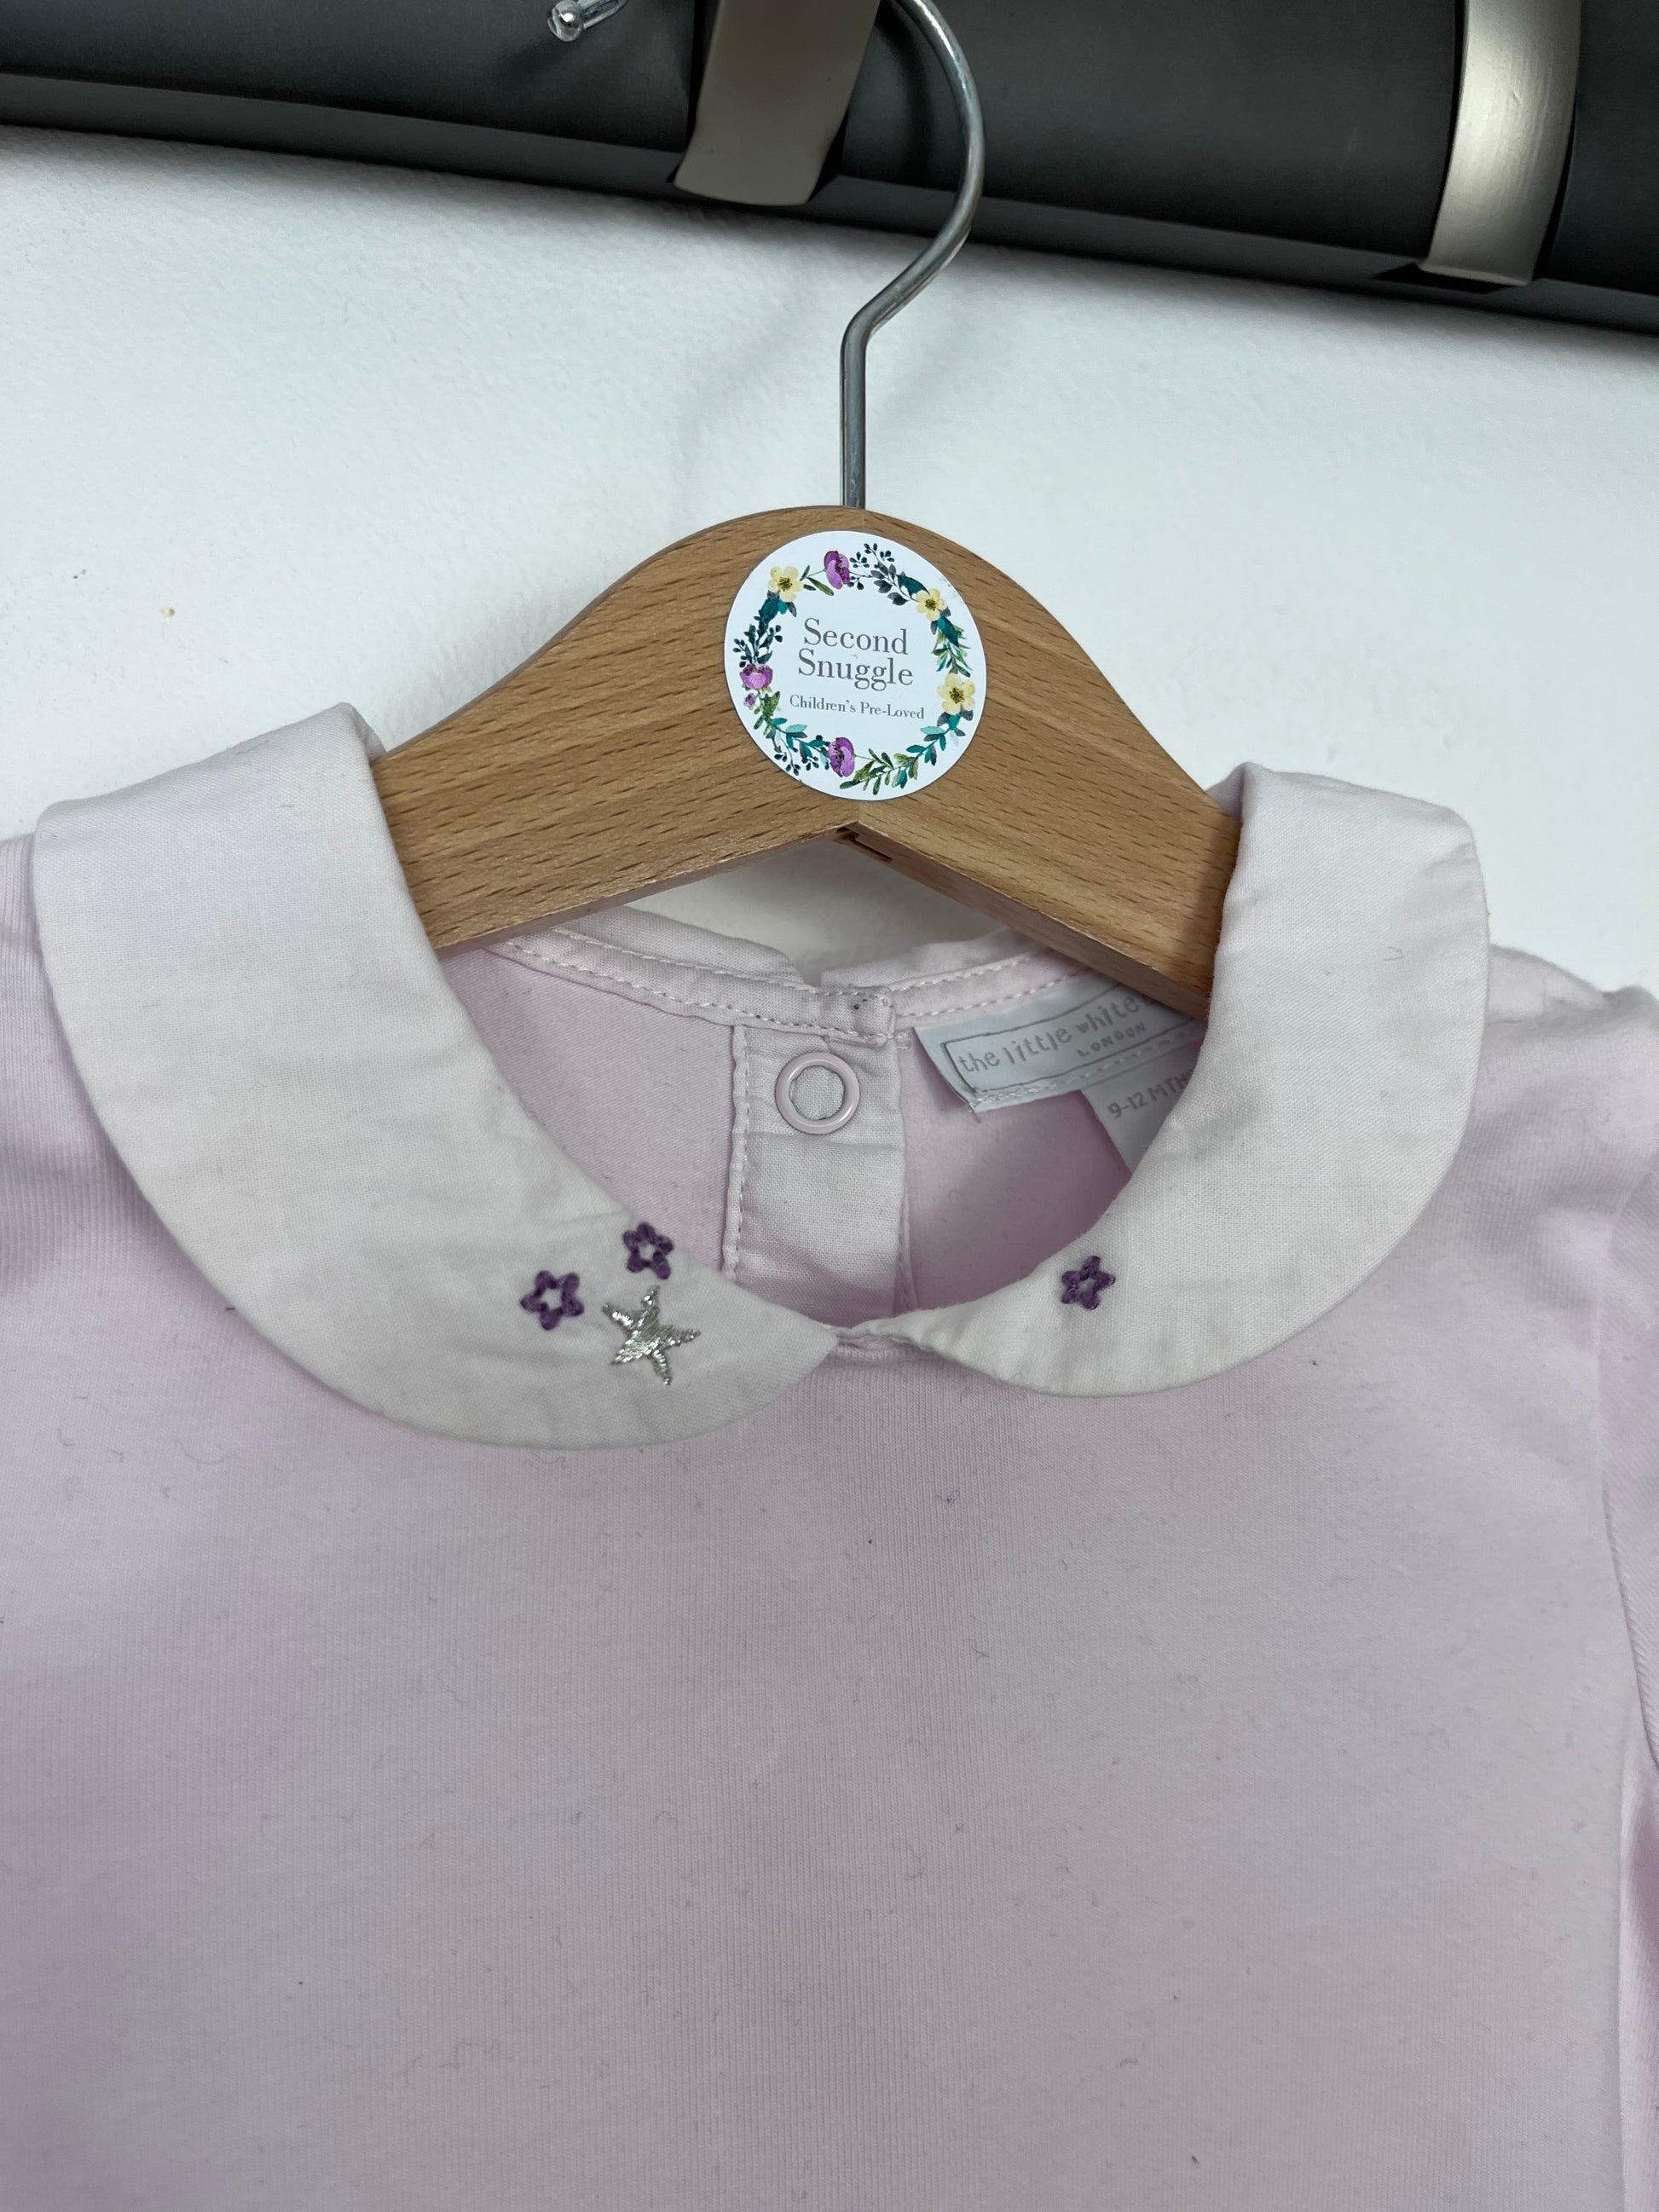 The Little White Company 9-12 Months-Vests-Second Snuggle Preloved